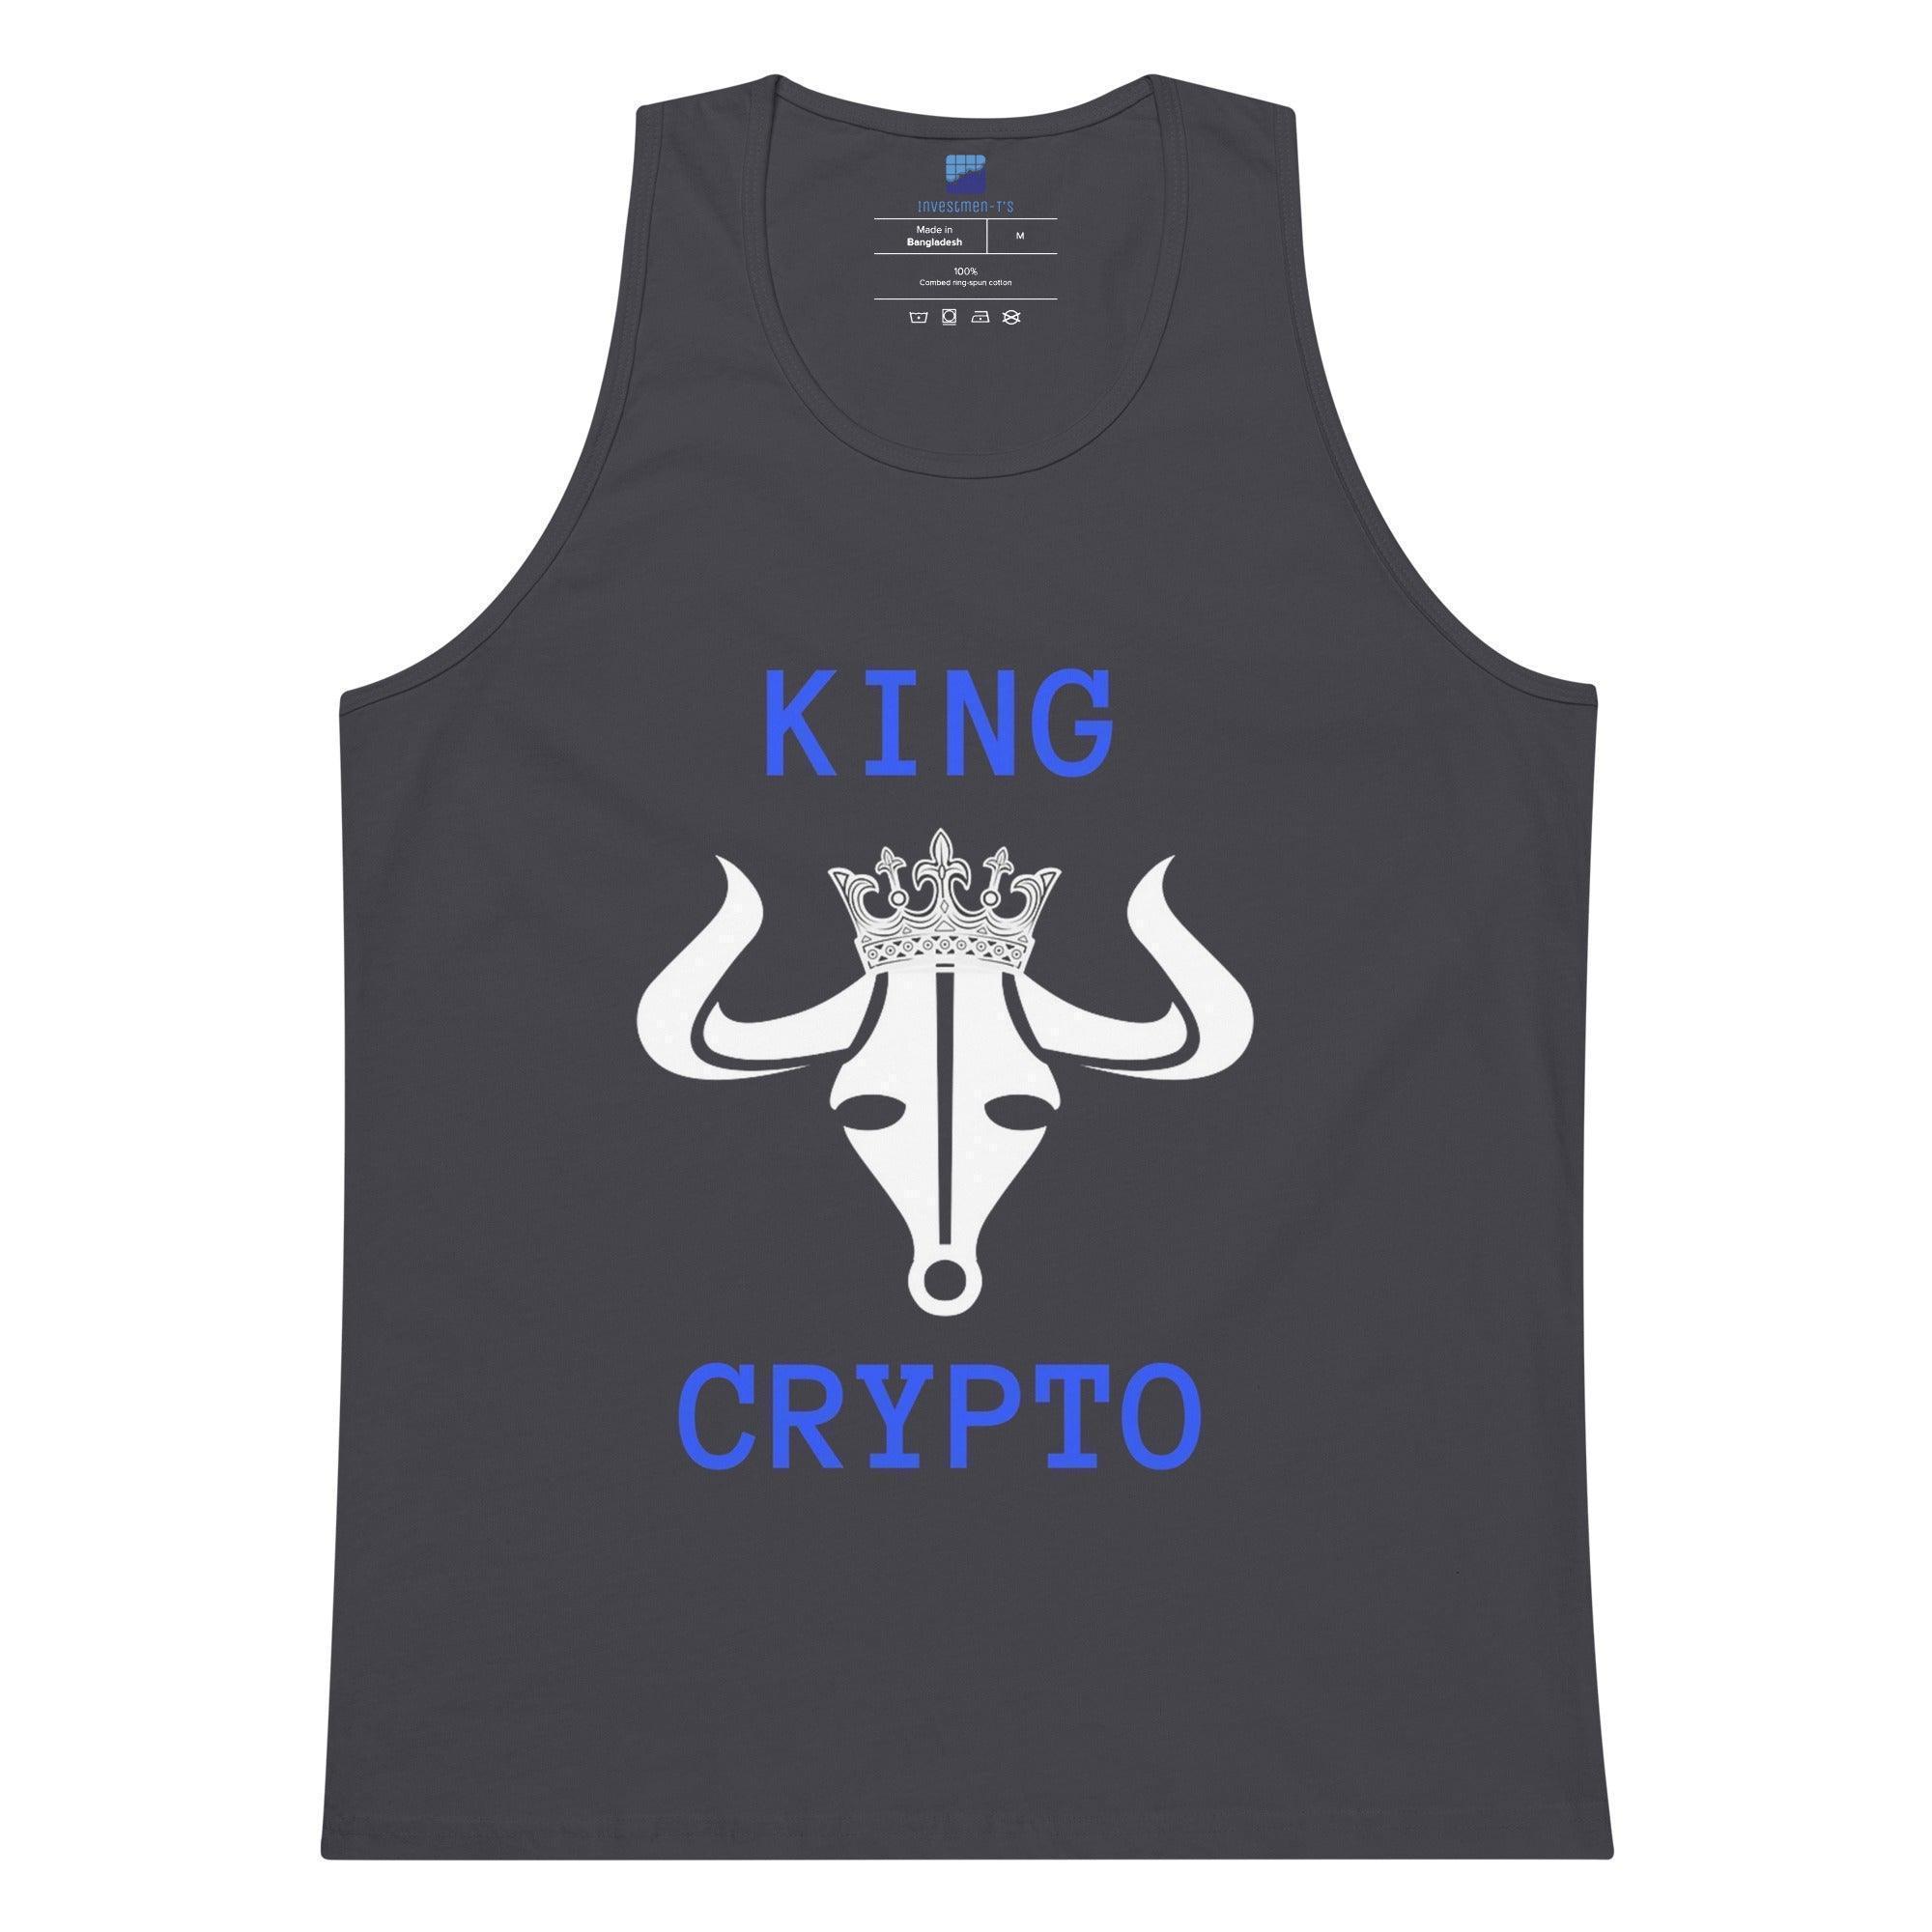 King Crypto Tank Top - InvestmenTees